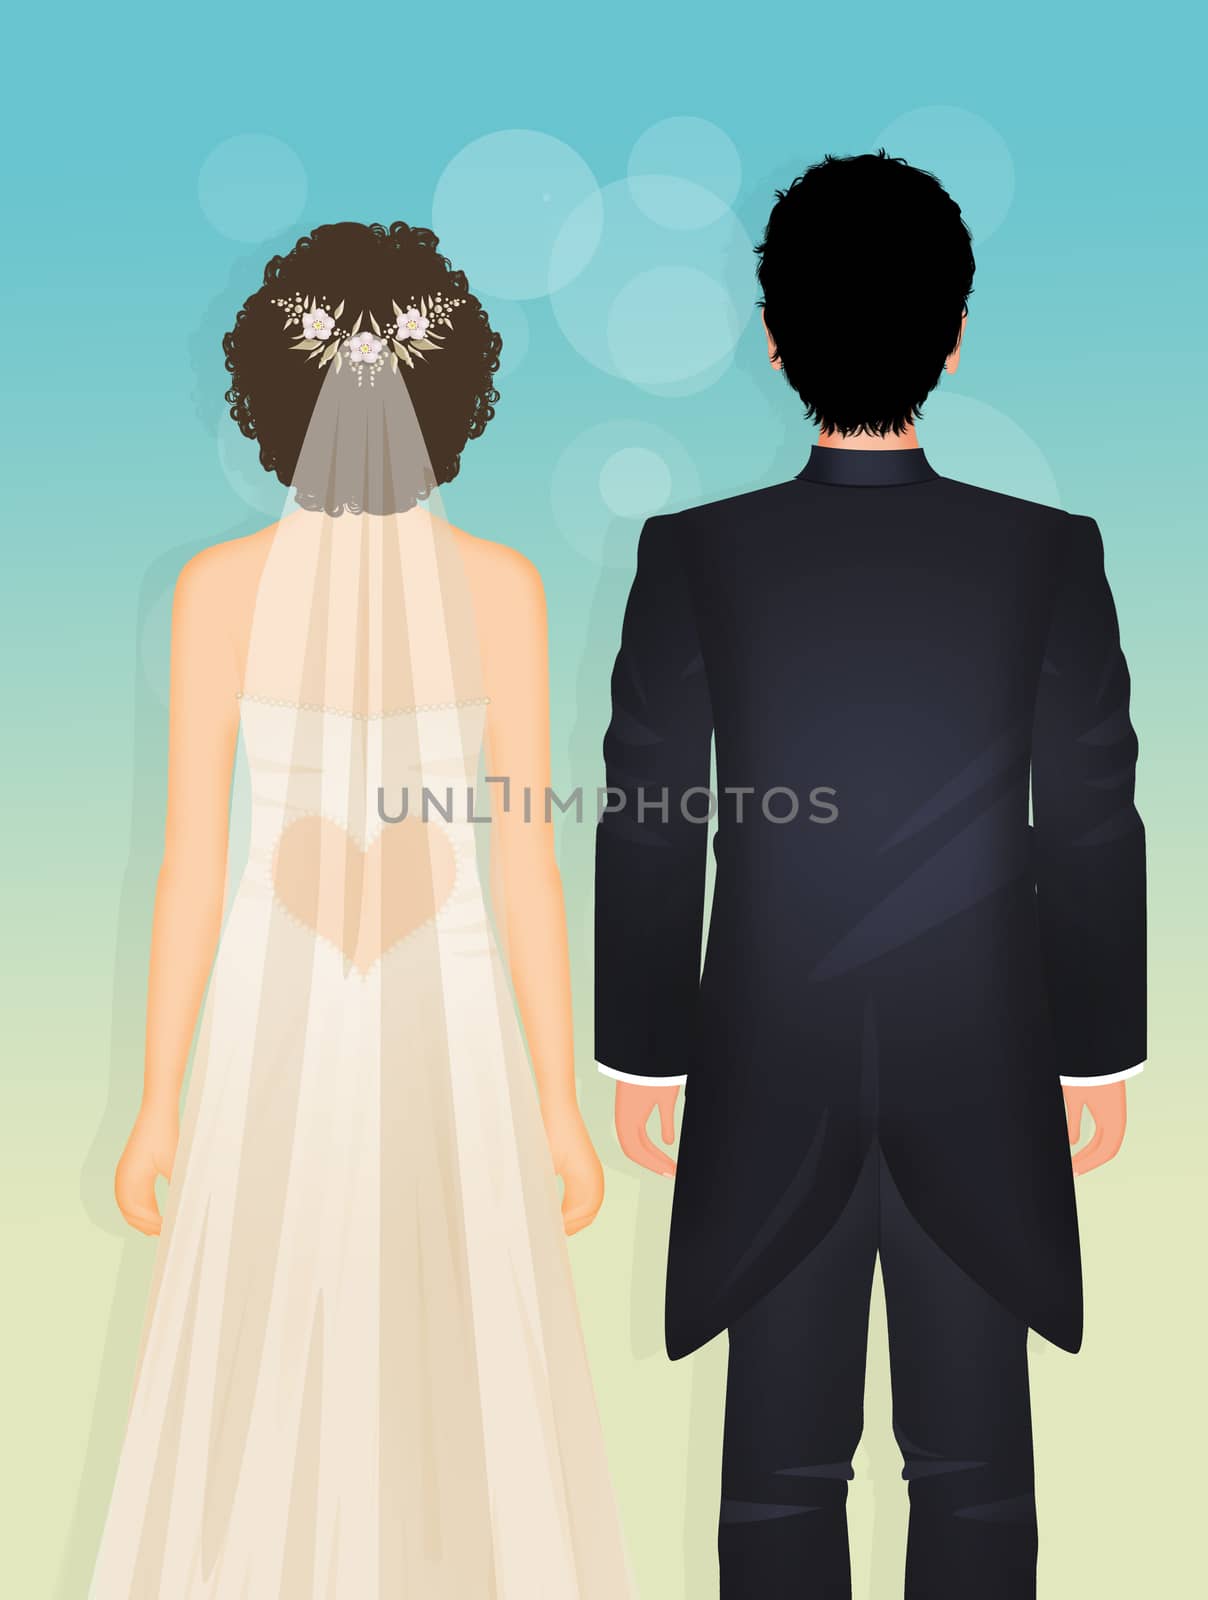 illustration of the bride and groom going to the altar